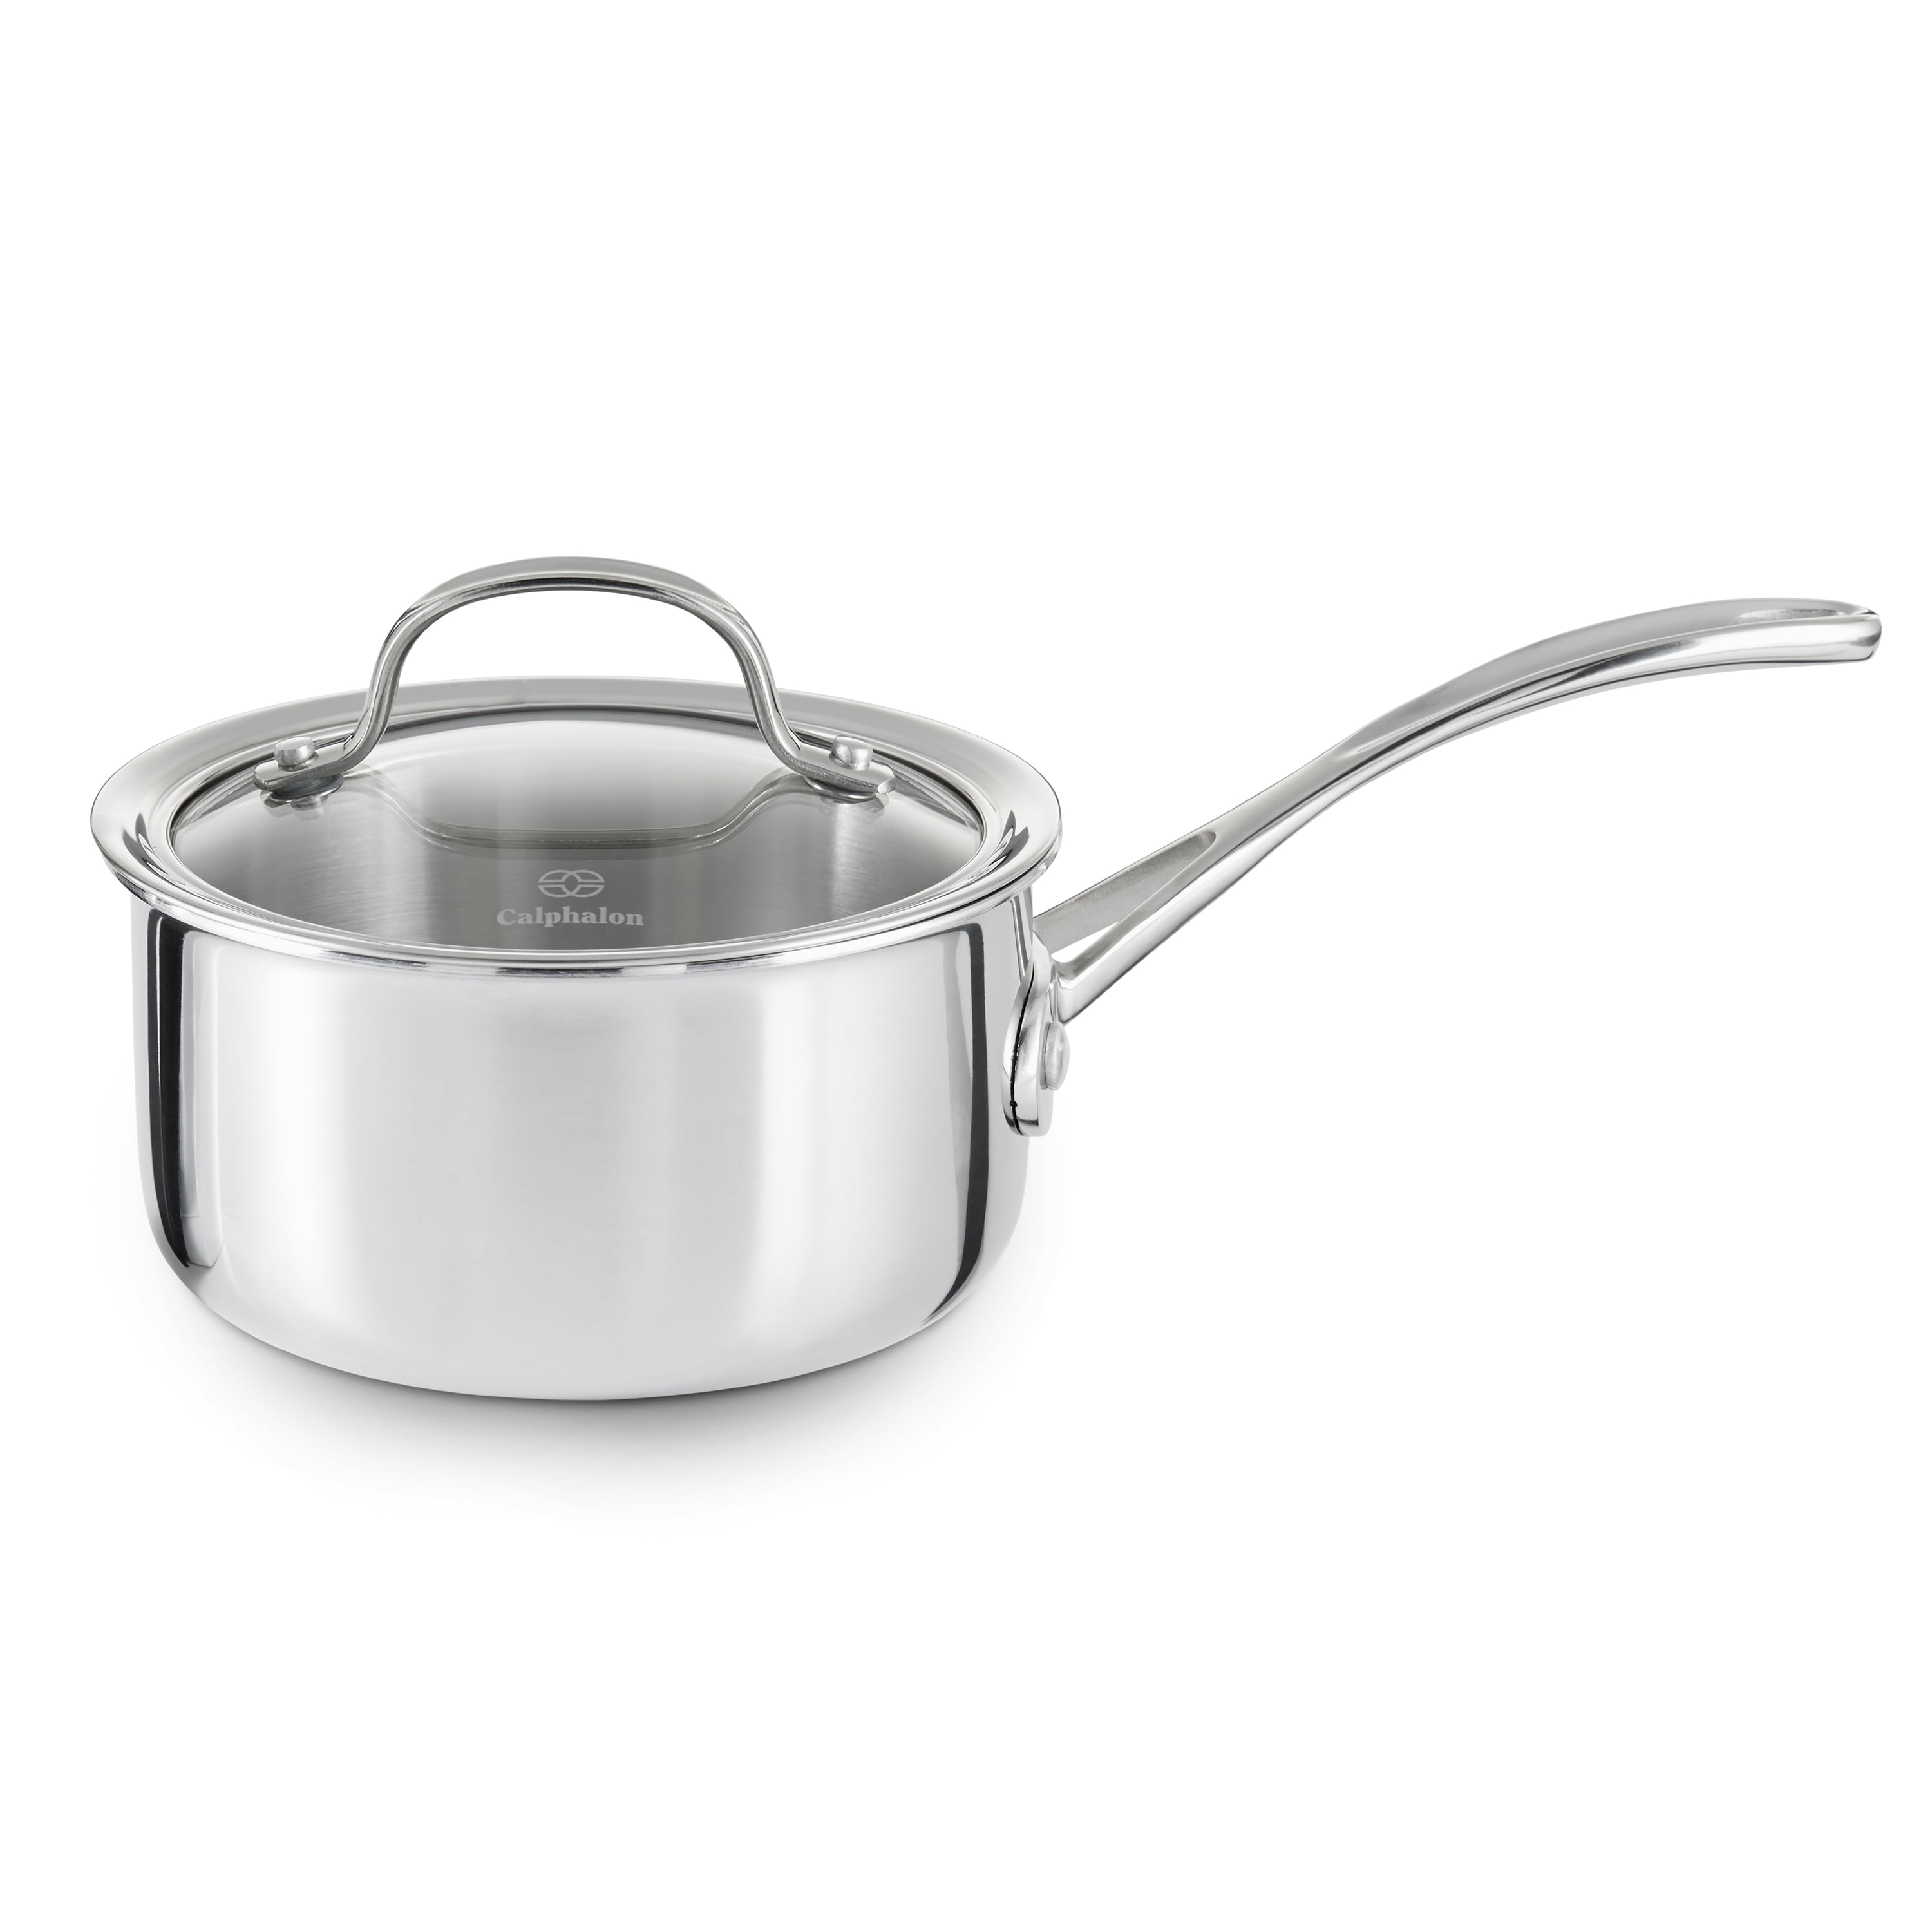 Calphalon CLOSEOUT! Tri-Ply Stainless Steel 8 Qt. Covered Stockpot